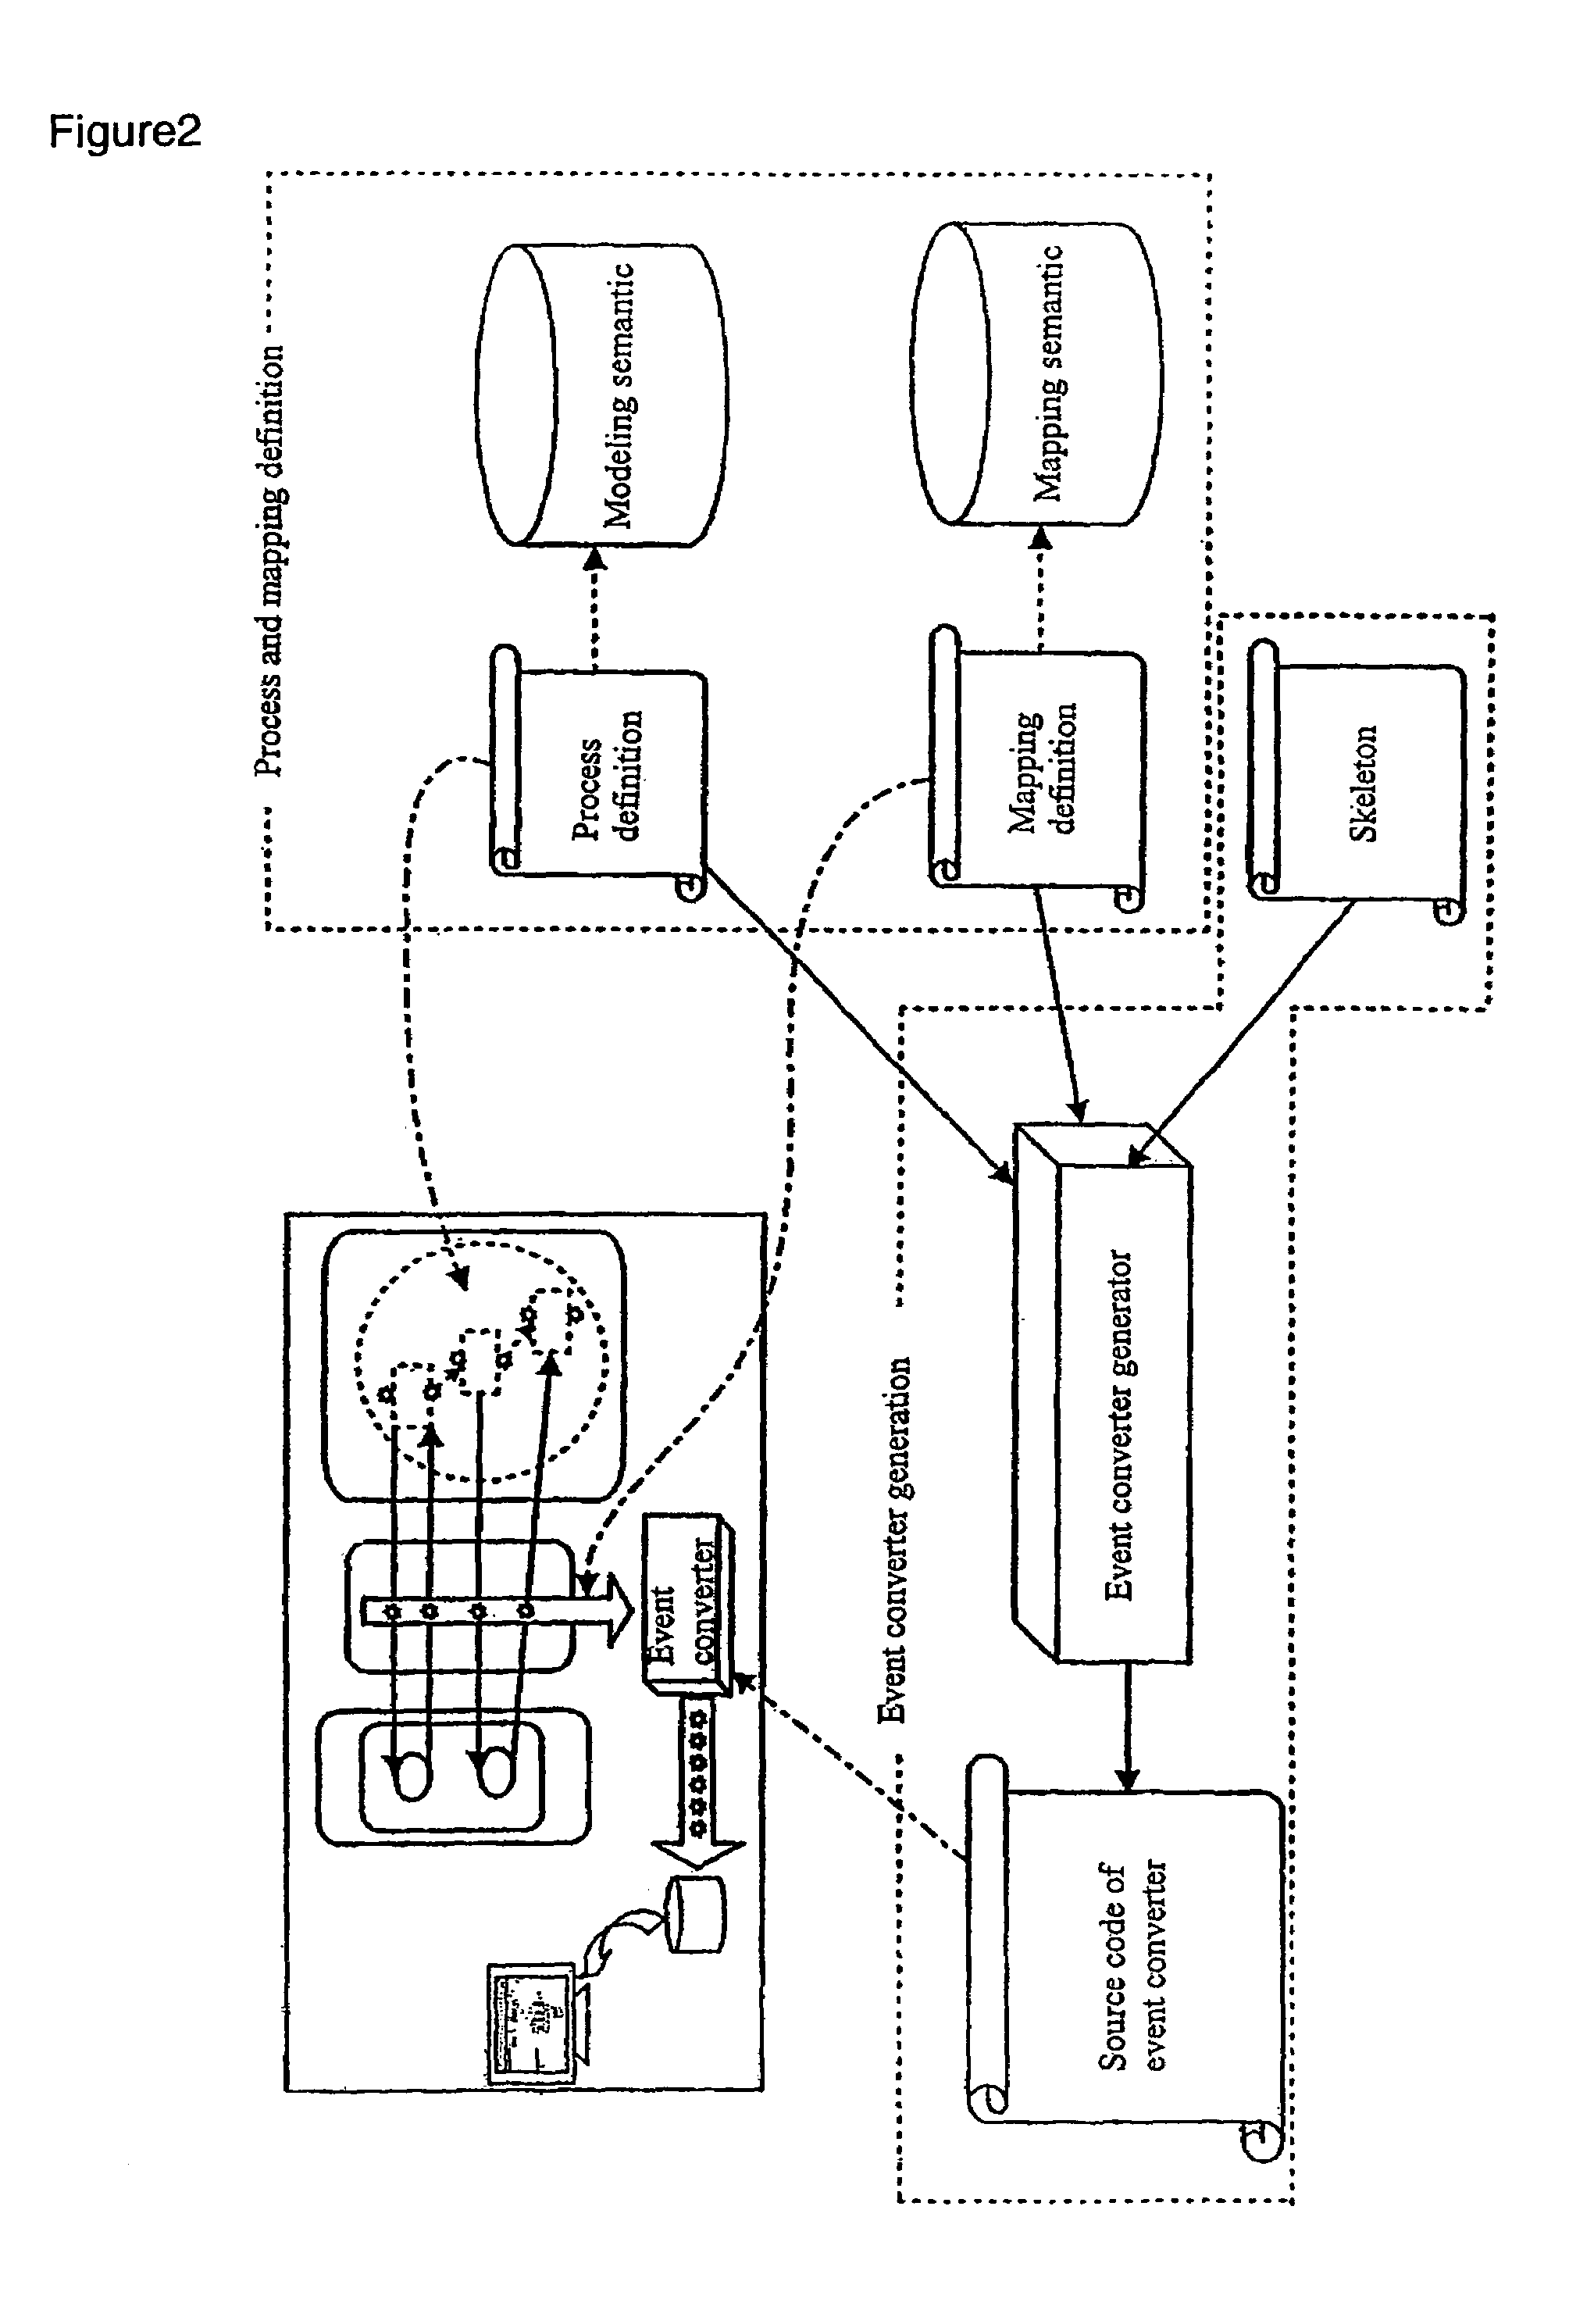 Activity monitoring without accessing a process object